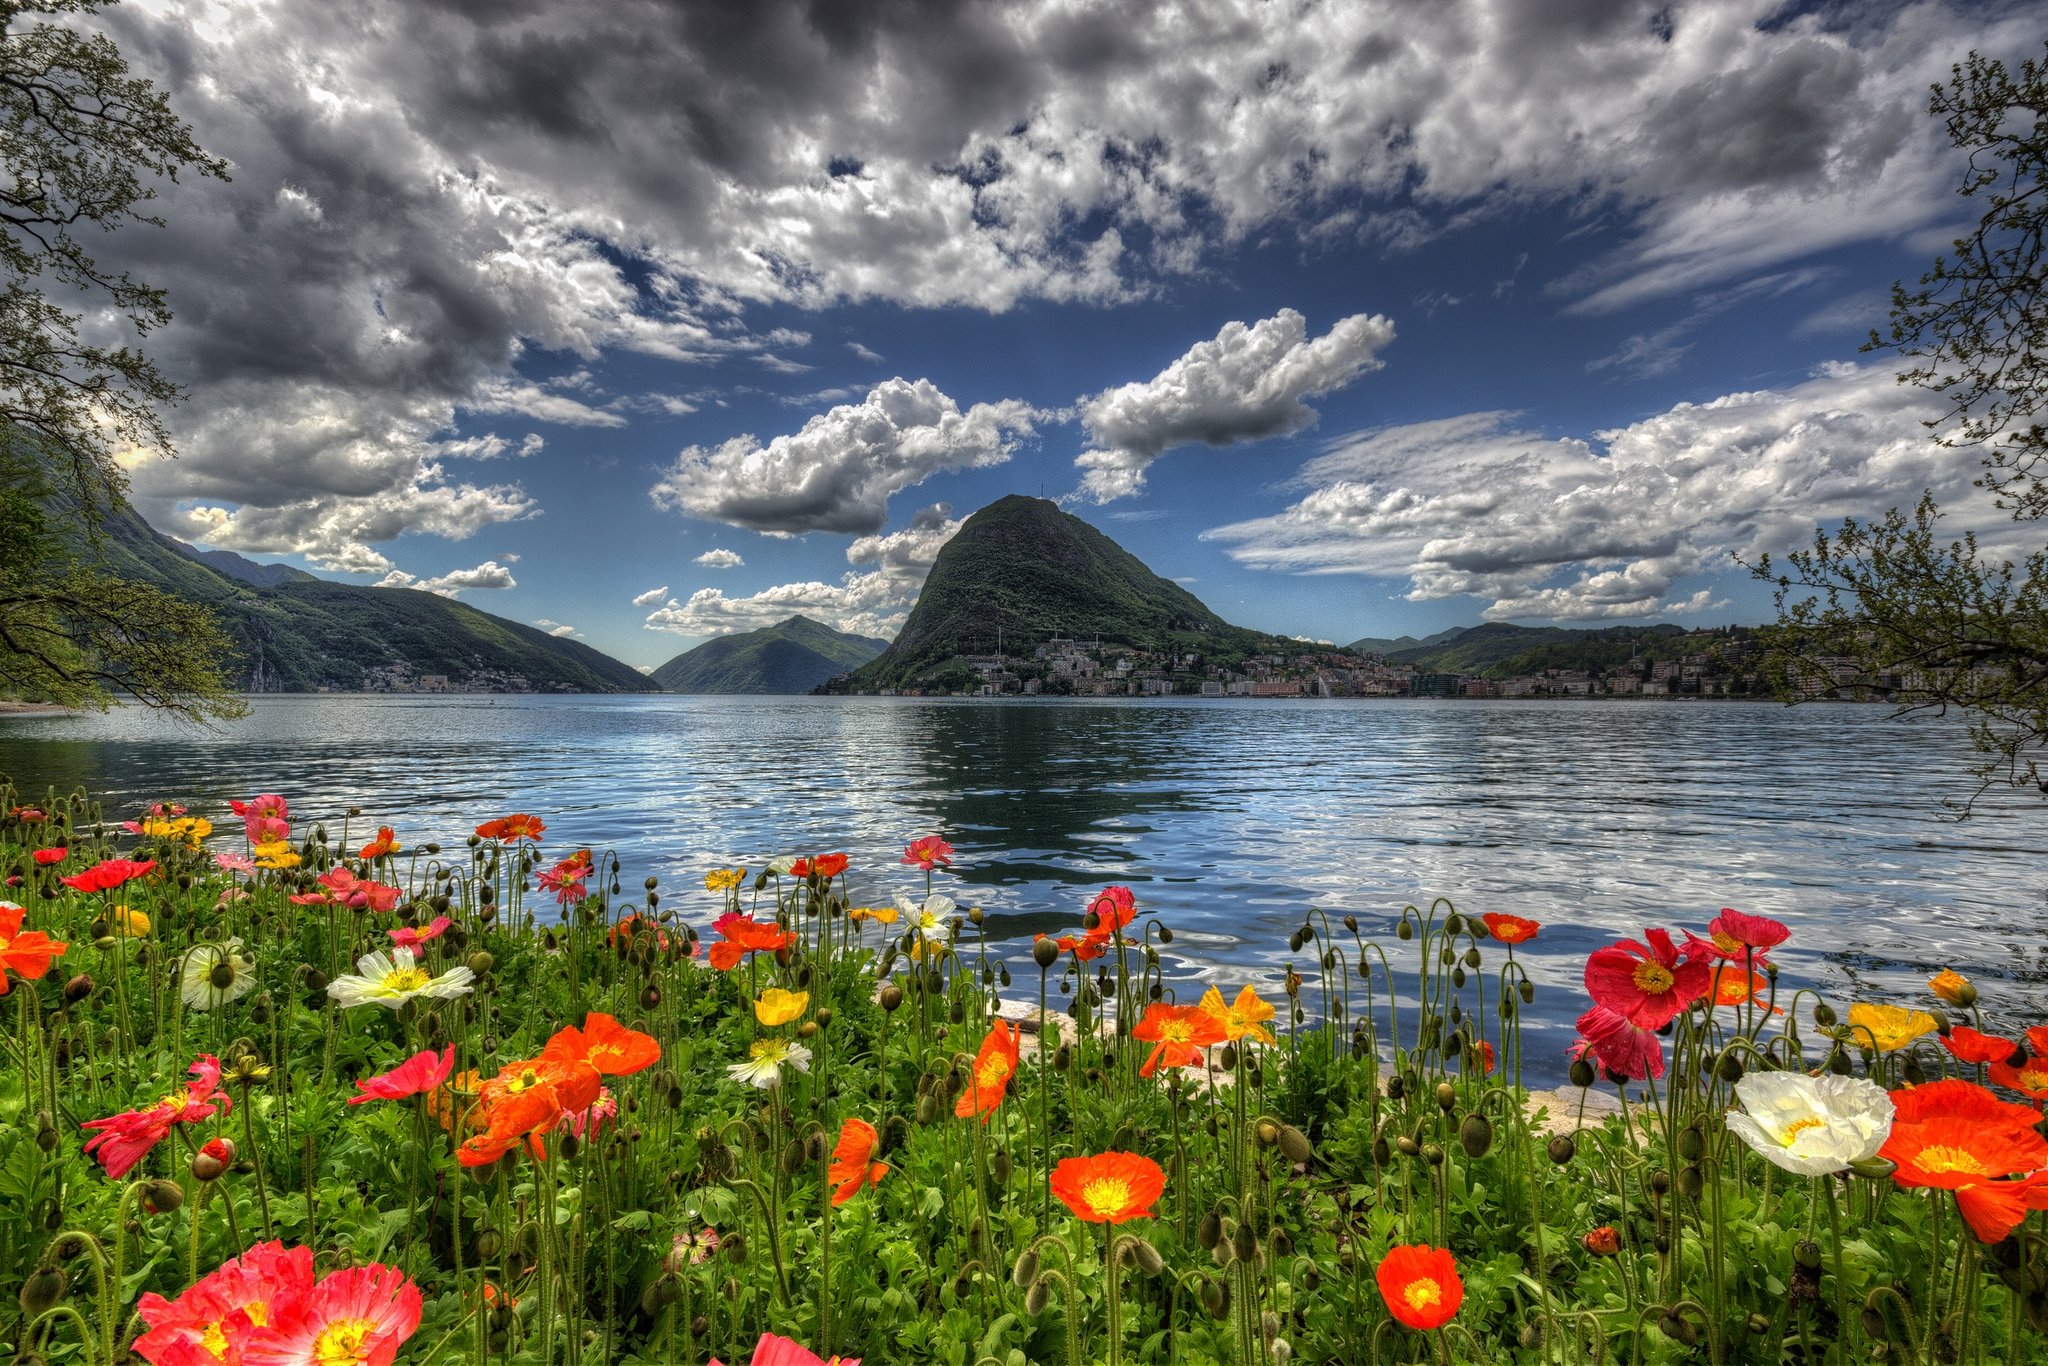 switzerland, Sky, Scenery, Mountains, Poppies, Lake, Clouds, Hdr